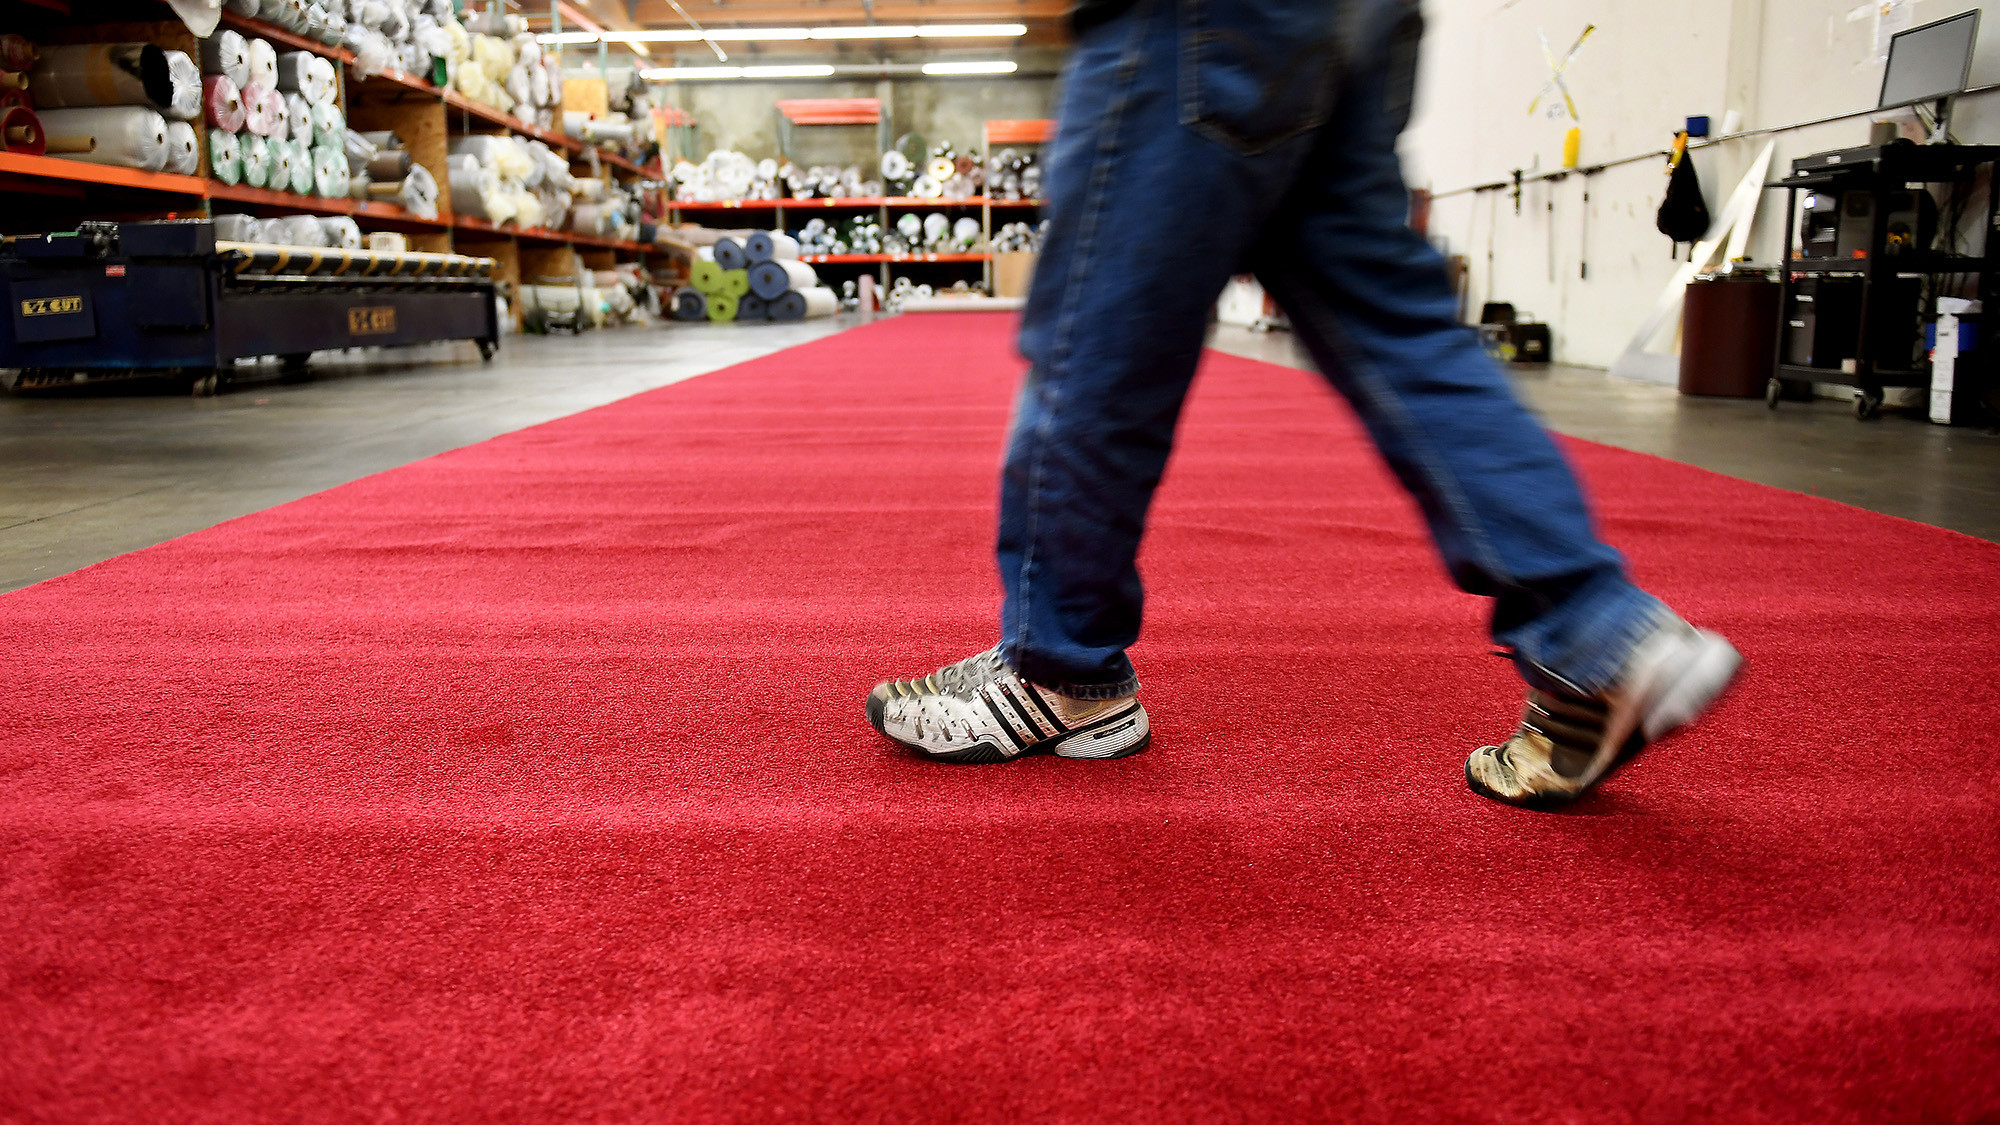 A carpet installer at Signature Systems Group walks across the red carpet in Santa Fe Springs.